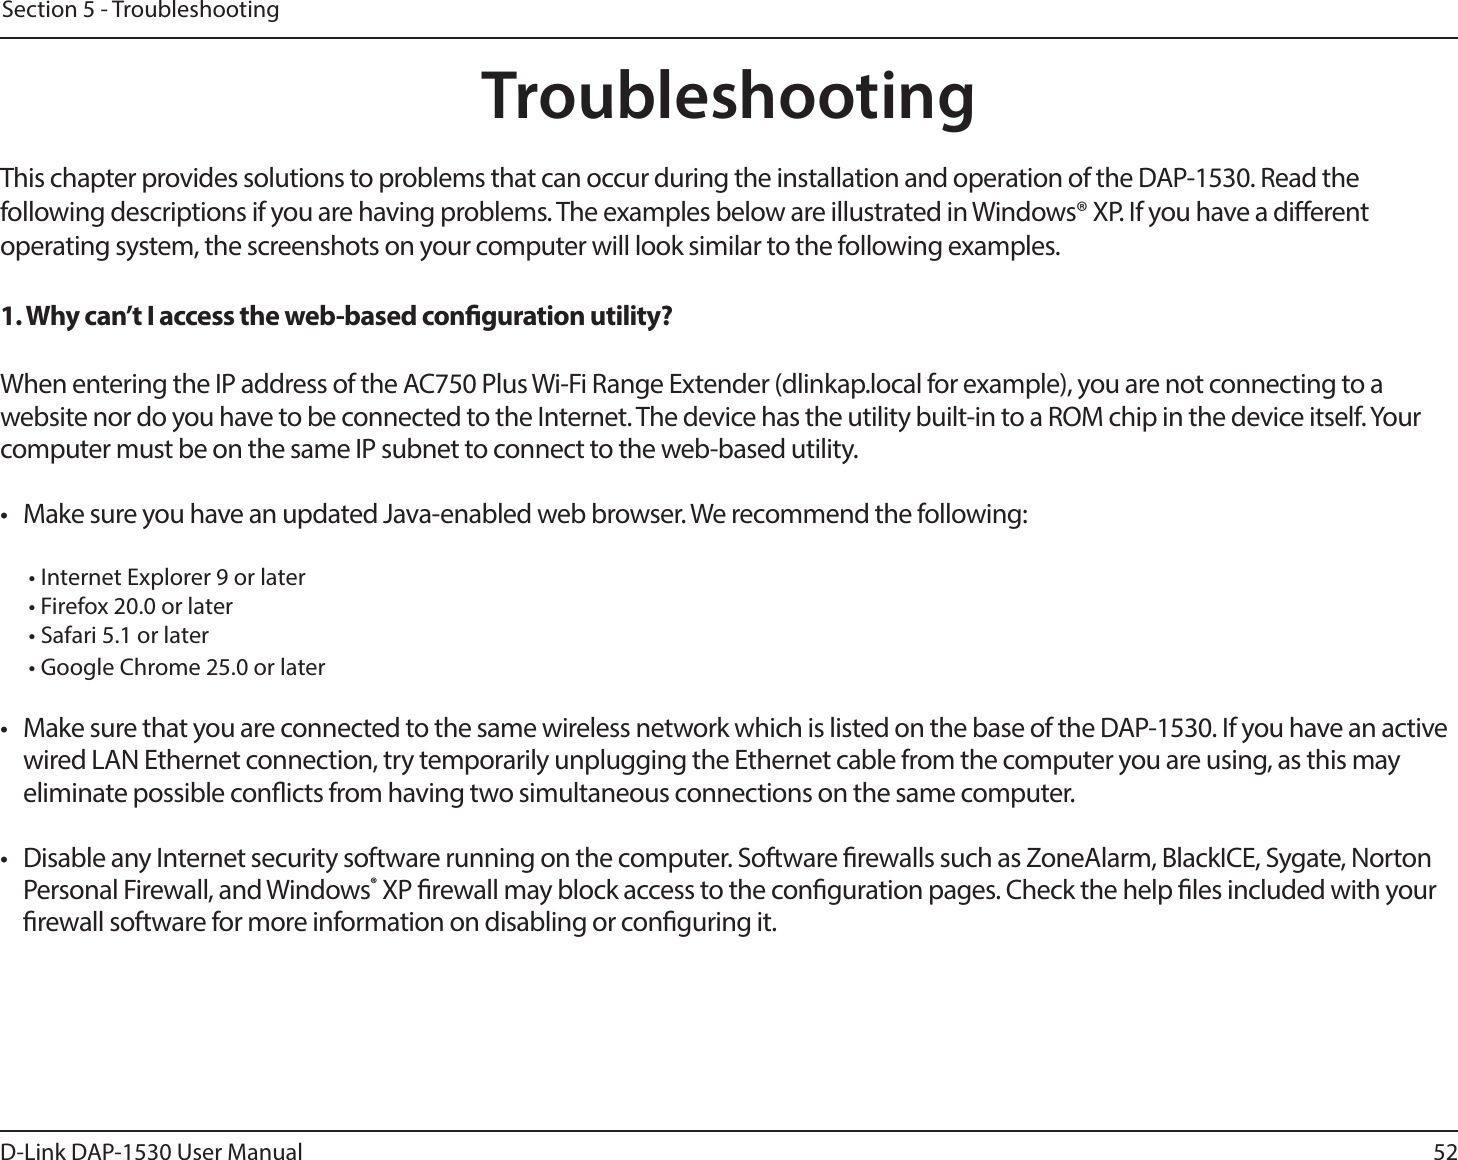 52D-Link DAP-1530 User ManualSection 5 - TroubleshootingTroubleshootingThis chapter provides solutions to problems that can occur during the installation and operation of the DAP-1530. Read the following descriptions if you are having problems. The examples below are illustrated in Windows® XP. If you have a dierent operating system, the screenshots on your computer will look similar to the following examples.1. Why can’t I access the web-based conguration utility?When entering the IP address of the AC750 Plus Wi-Fi Range Extender (dlinkap.local for example), you are not connecting to a website nor do you have to be connected to the Internet. The device has the utility built-in to a ROM chip in the device itself. Your computer must be on the same IP subnet to connect to the web-based utility. •  Make sure you have an updated Java-enabled web browser. We recommend the following:  • Internet Explorer 9 or later• Firefox 20.0 or later• Safari 5.1 or later• Google Chrome 25.0 or later•  Make sure that you are connected to the same wireless network which is listed on the base of the DAP-1530. If you have an active wired LAN Ethernet connection, try temporarily unplugging the Ethernet cable from the computer you are using, as this may eliminate possible conicts from having two simultaneous connections on the same computer. •  Disable any Internet security software running on the computer. Software rewalls such as ZoneAlarm, BlackICE, Sygate, Norton Personal Firewall, and Windows® XP rewall may block access to the conguration pages. Check the help les included with your rewall software for more information on disabling or conguring it.